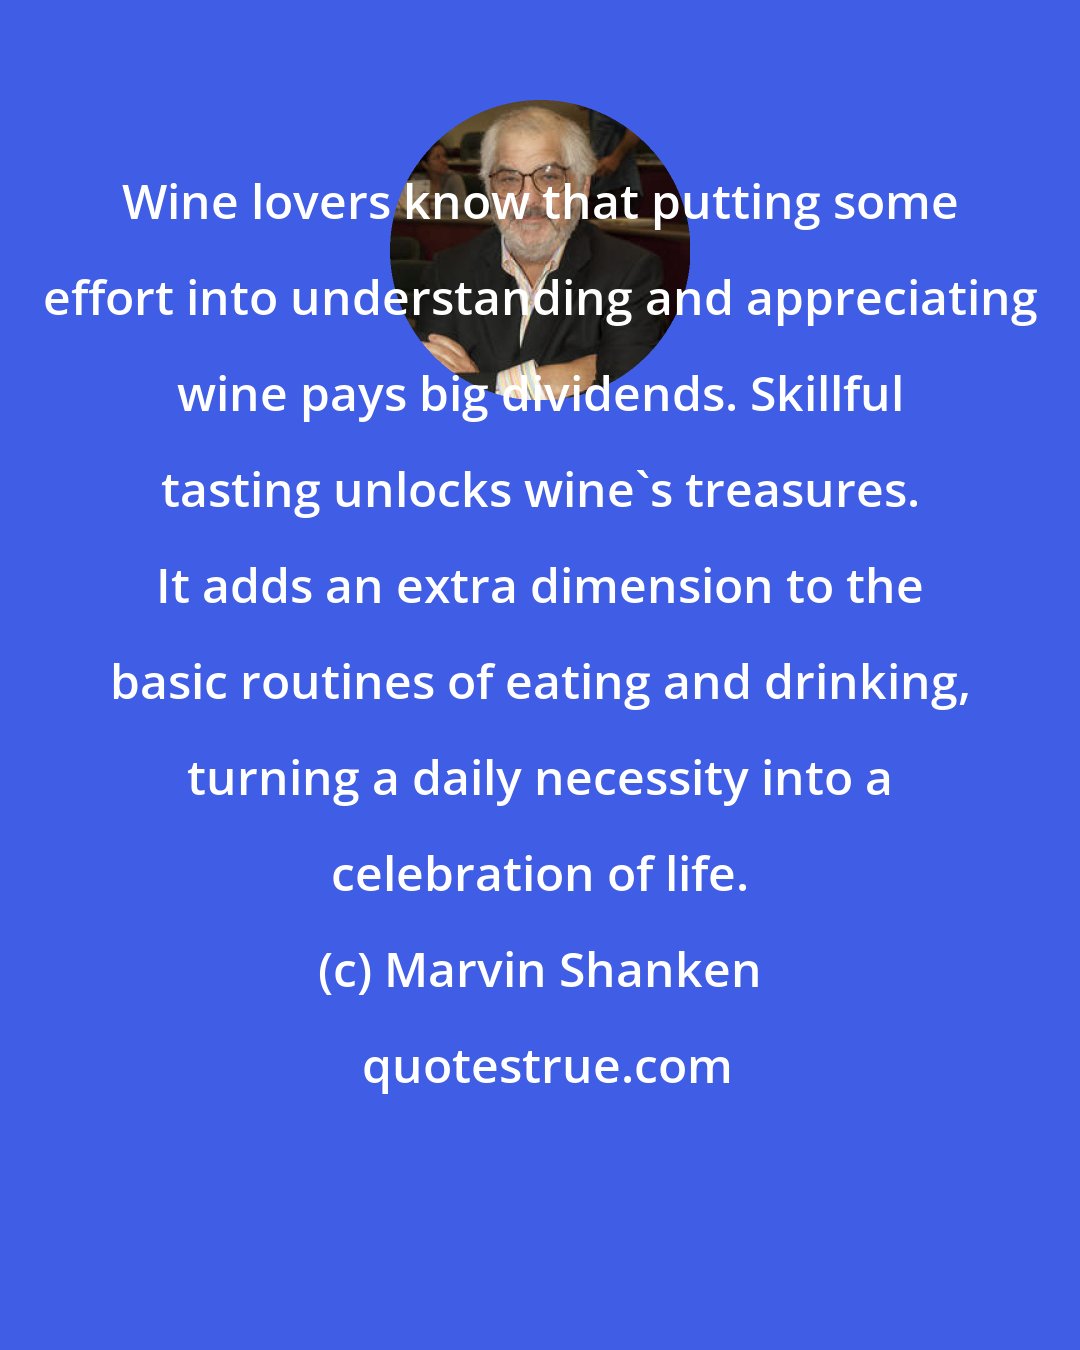 Marvin Shanken: Wine lovers know that putting some effort into understanding and appreciating wine pays big dividends. Skillful tasting unlocks wine's treasures. It adds an extra dimension to the basic routines of eating and drinking, turning a daily necessity into a celebration of life.